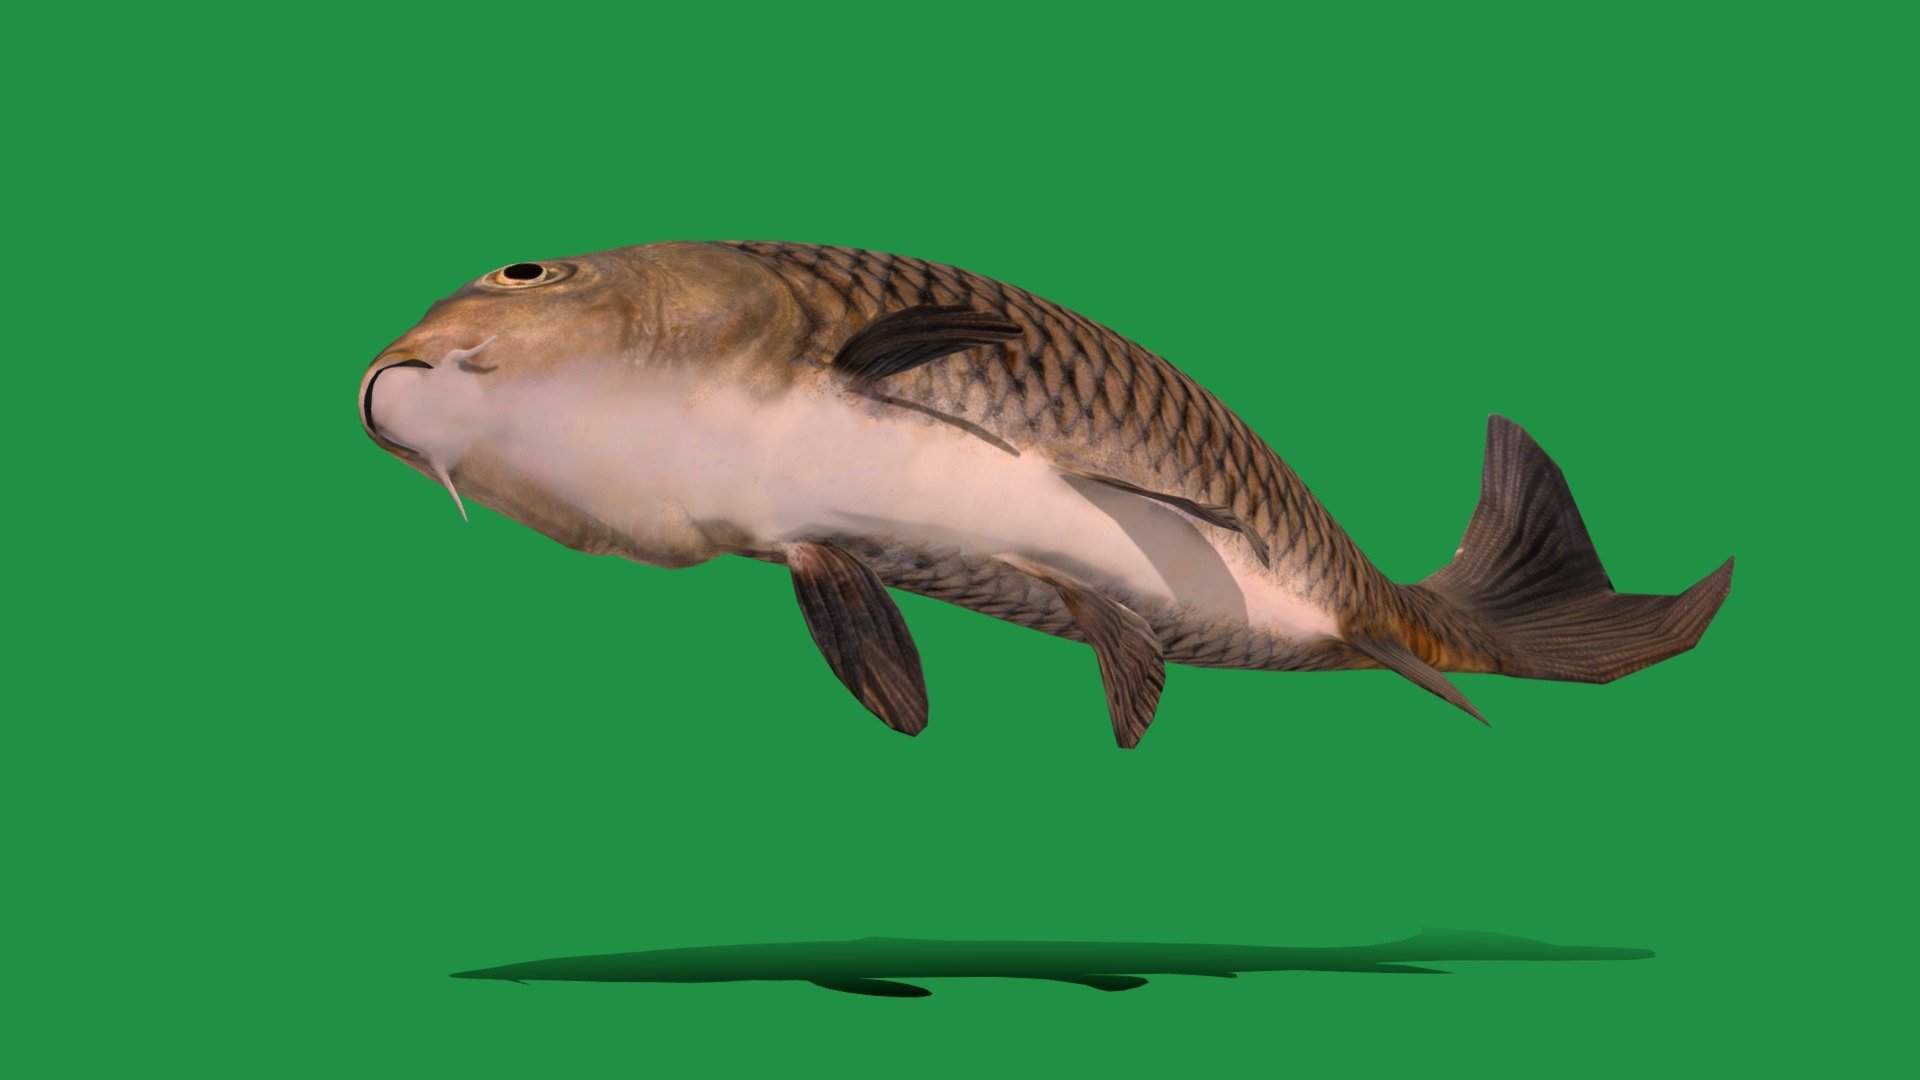 Common Eurasian Carp (European carp)Endangered Species

Cyprinus Carpio Animal Fish(Aquatic)freshwater,Marine Animals,

1 Draw Calls

LowPoly

Game Ready (Character)

Subdivision Surface Ready

6- Animations 

4K PBR Textures 1 Material

Unreal/Unity FBX 

Blend File 3.6.5 LTS / 4 Plus

USDZ File (AR Ready). Real Scale Dimension (Xcode ,Reality Composer, Keynote Ready)

Textures Files

GLB File (Unreal 5.1 Plus Native Support,Gadot)


Gltf File ( Spark AR, Lens Studio(SnapChat) , Effector(Tiktok) , Spline, Play Canvas,Omiverse ) Compatible




Triangles -3896



Faces -1982

Edges -3949

Vertices -1972

Diffuse, Metallic, Roughness , Normal Map ,Specular Map,AO


The Eurasian carp ,European carp, widely known as the common carp, is a widespread freshwater fish of eutrophic waters in lakes and large rivers in Europe and Asia.Common carp (Cyprinus carpio) are large, heavy-bodied freshwater fish native to Europe and Asia.Common carp are omnivorous bottom feeders - Common Carp Fish (Endangered) - Buy Royalty Free 3D model by Nyilonelycompany 3d model